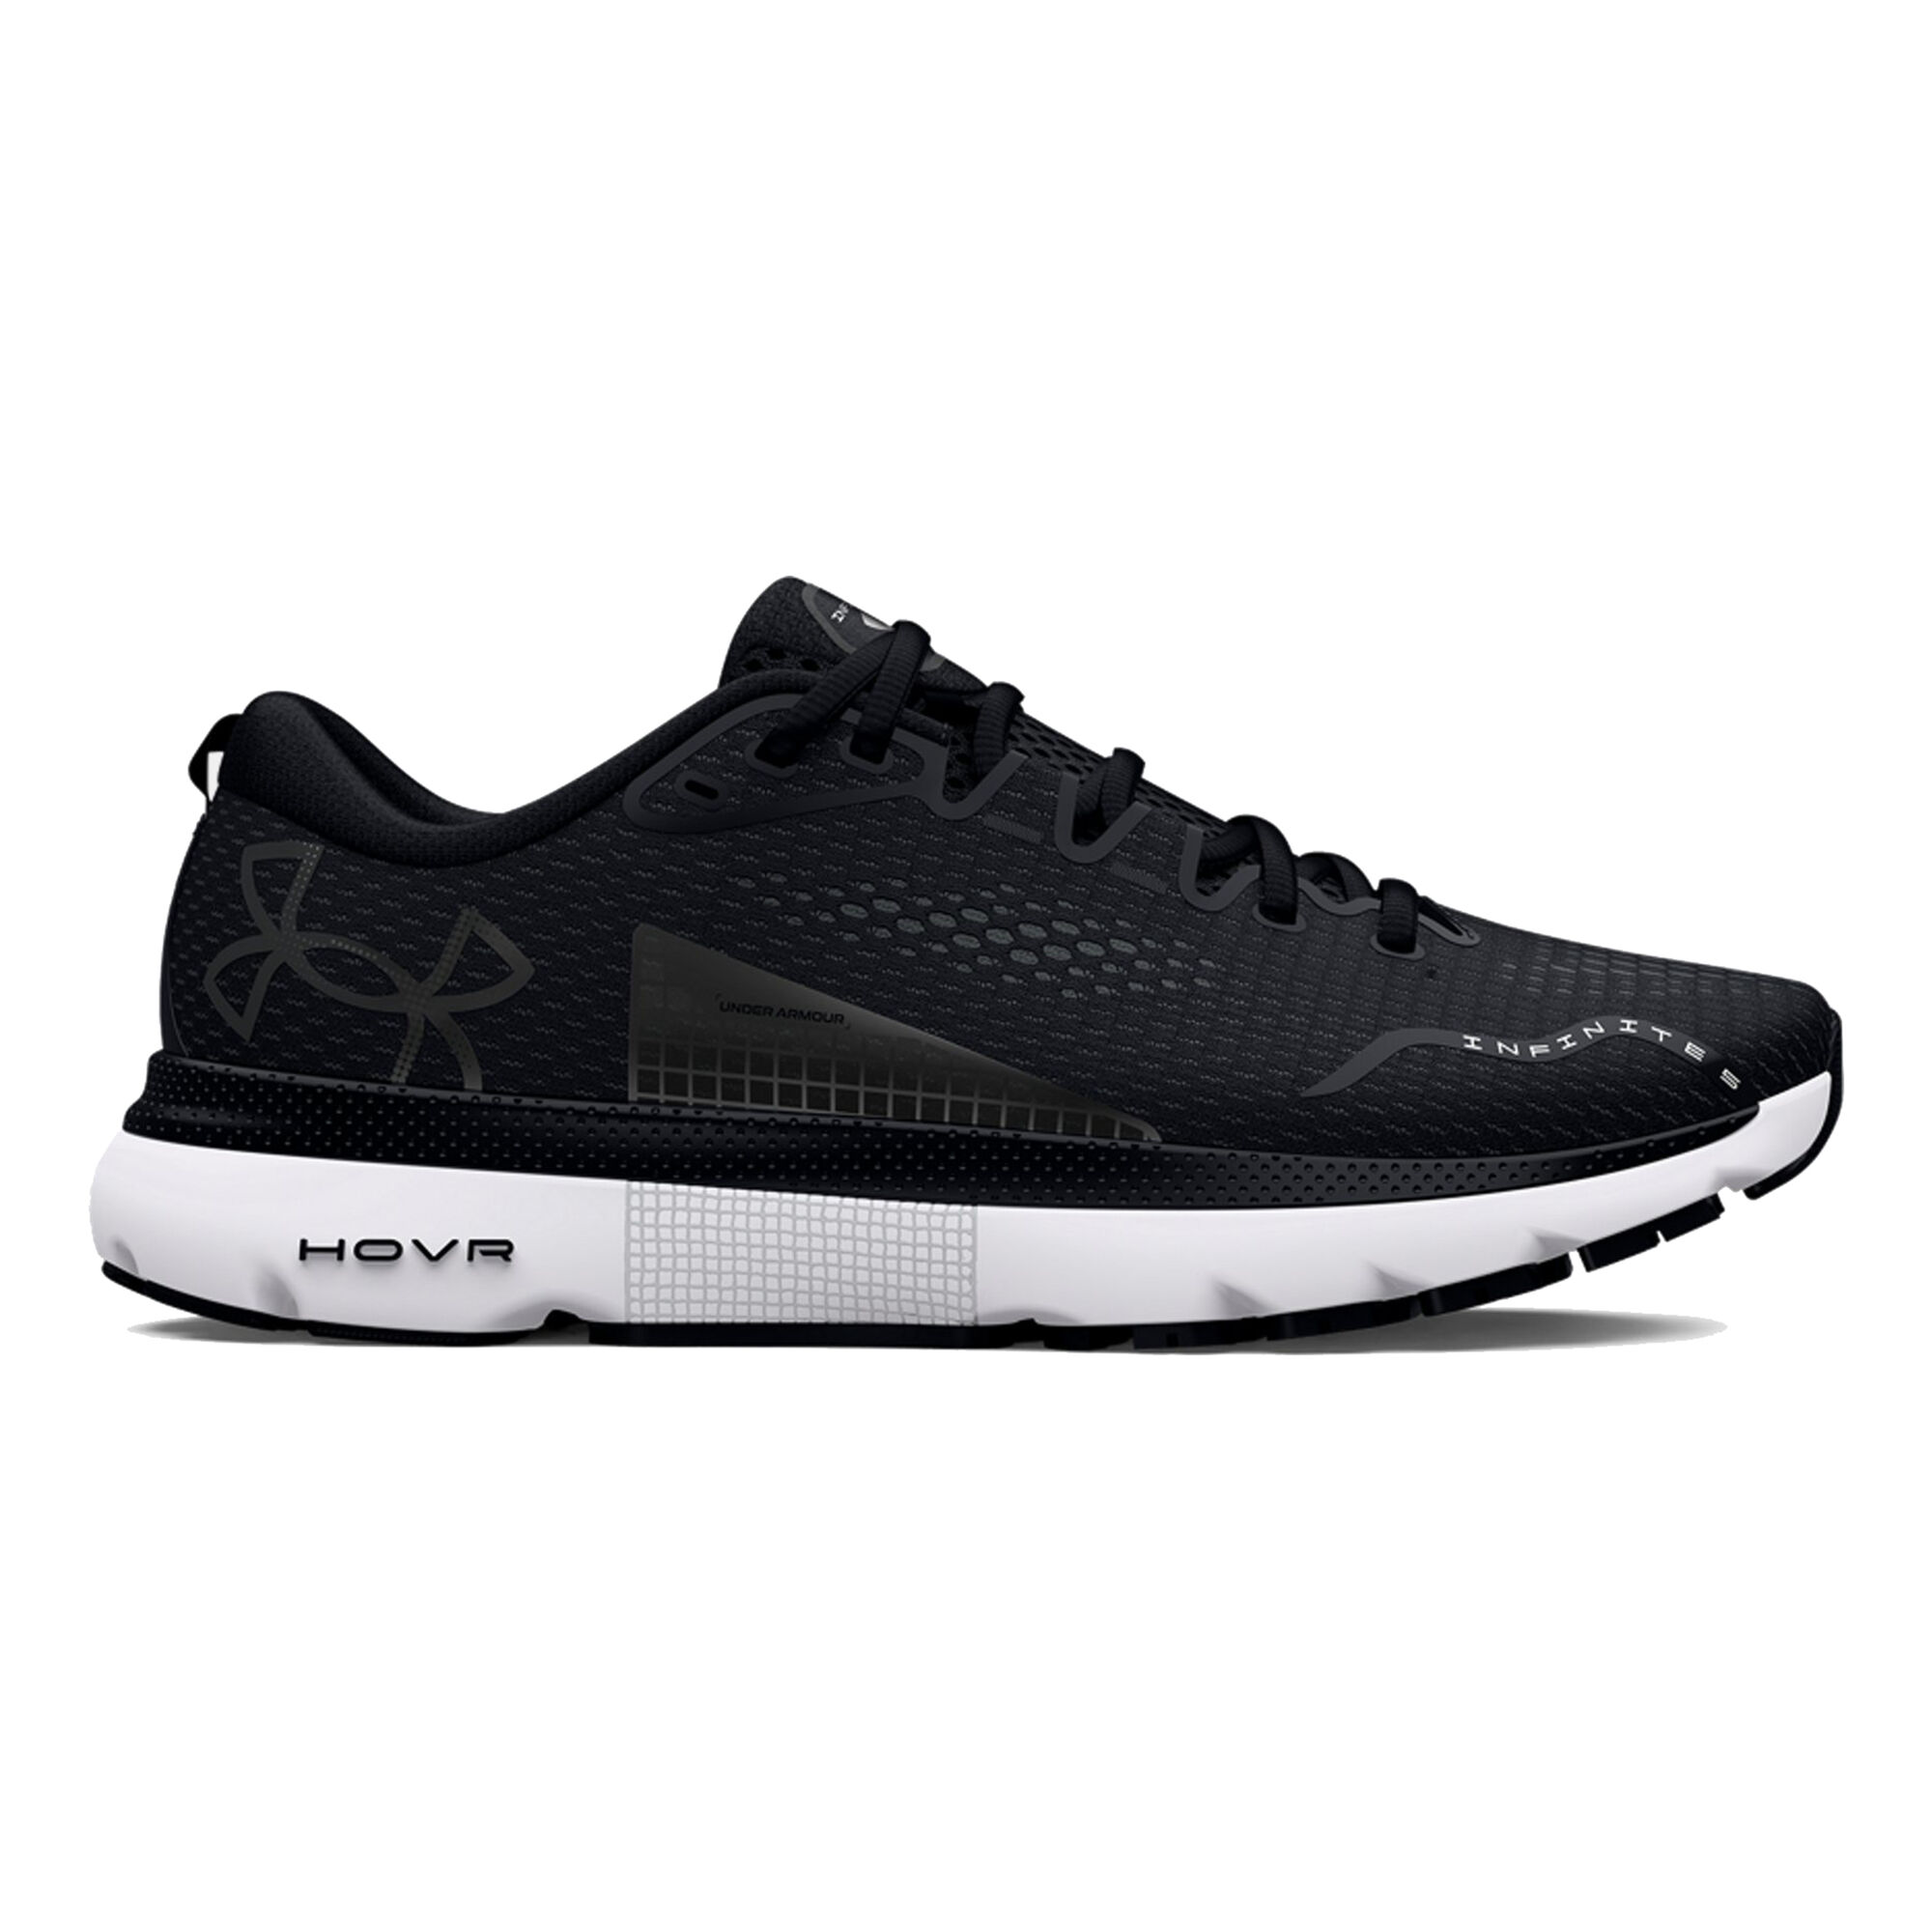 Supersports Vietnam Official  Men's Under Armour Charged Cotton